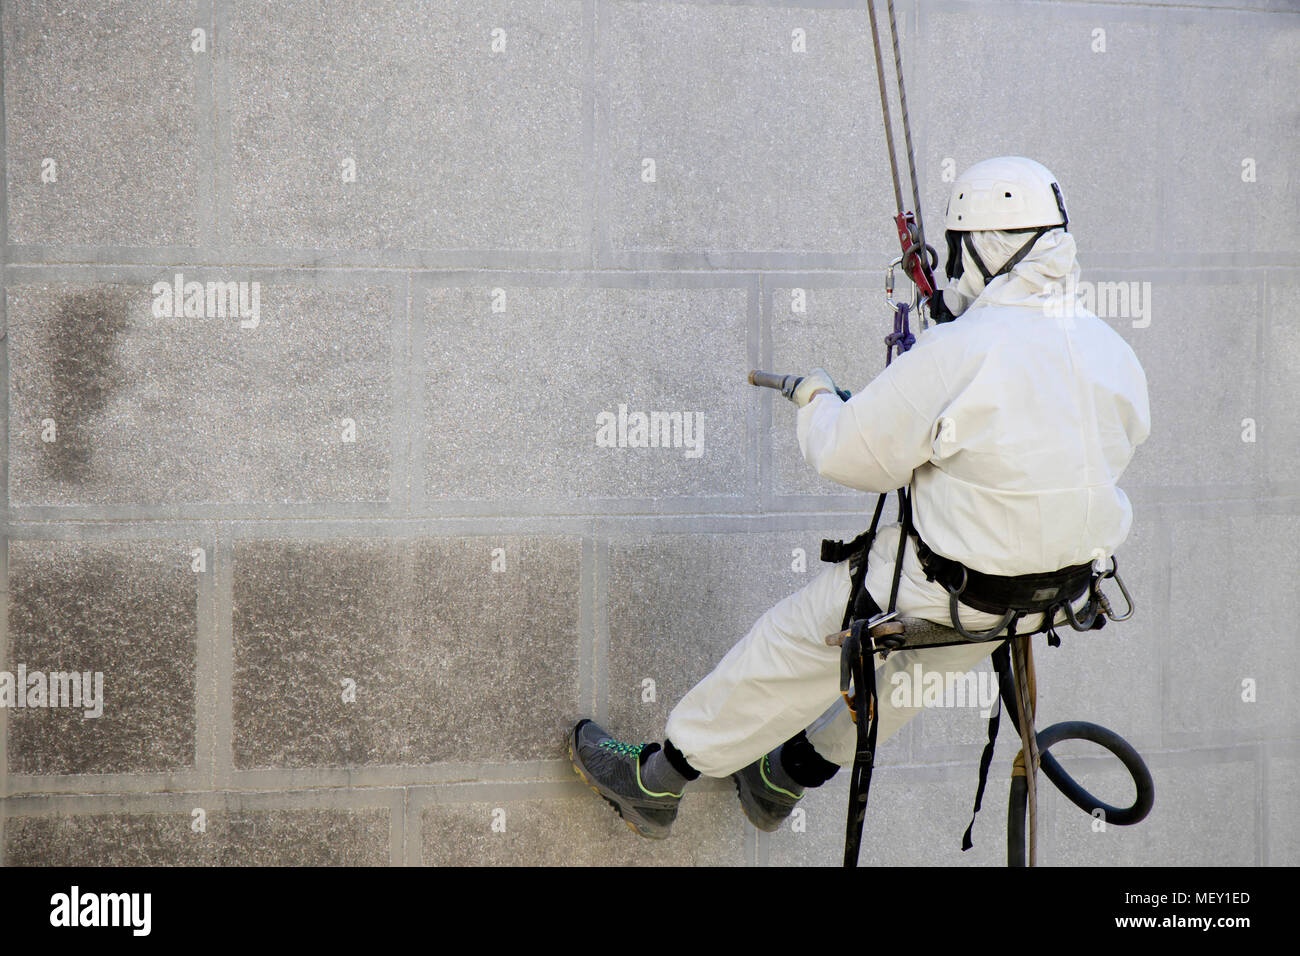 Rope access facade maintenance; A worker wearing a protective gear cleaning a stone exterior with sandblasting equipment Stock Photo